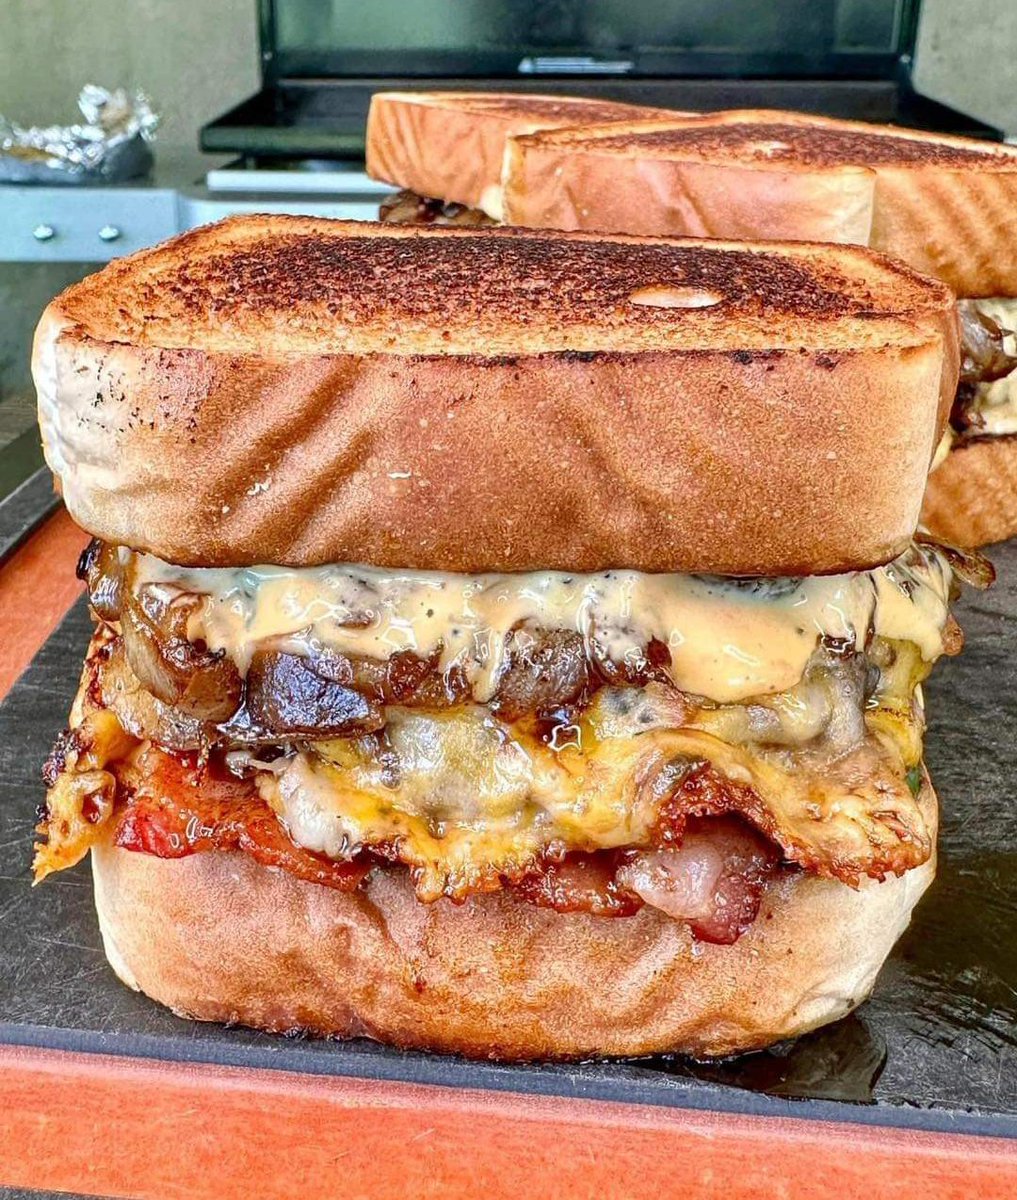 Pattymelt with Texas toast. I'd eat this breakfast, luch, or dinner.  😋